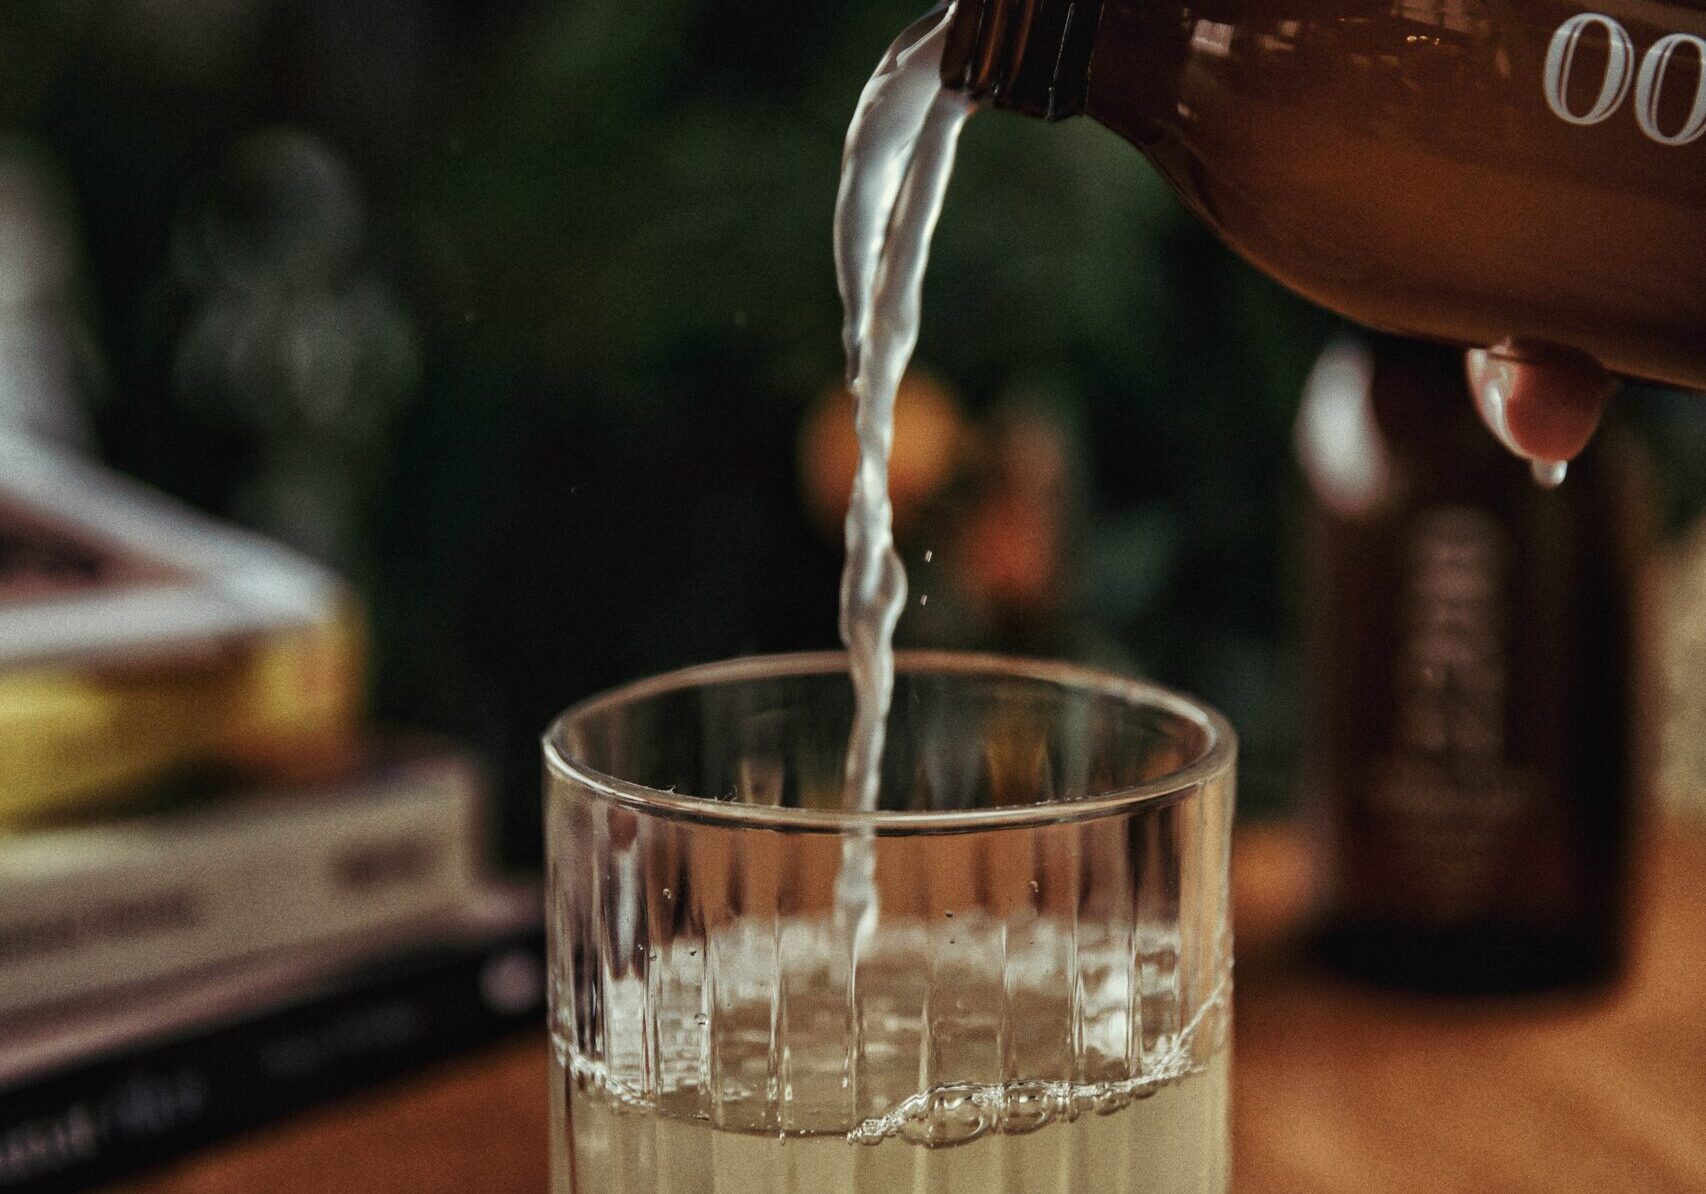 Kombucha being poured into a glass.